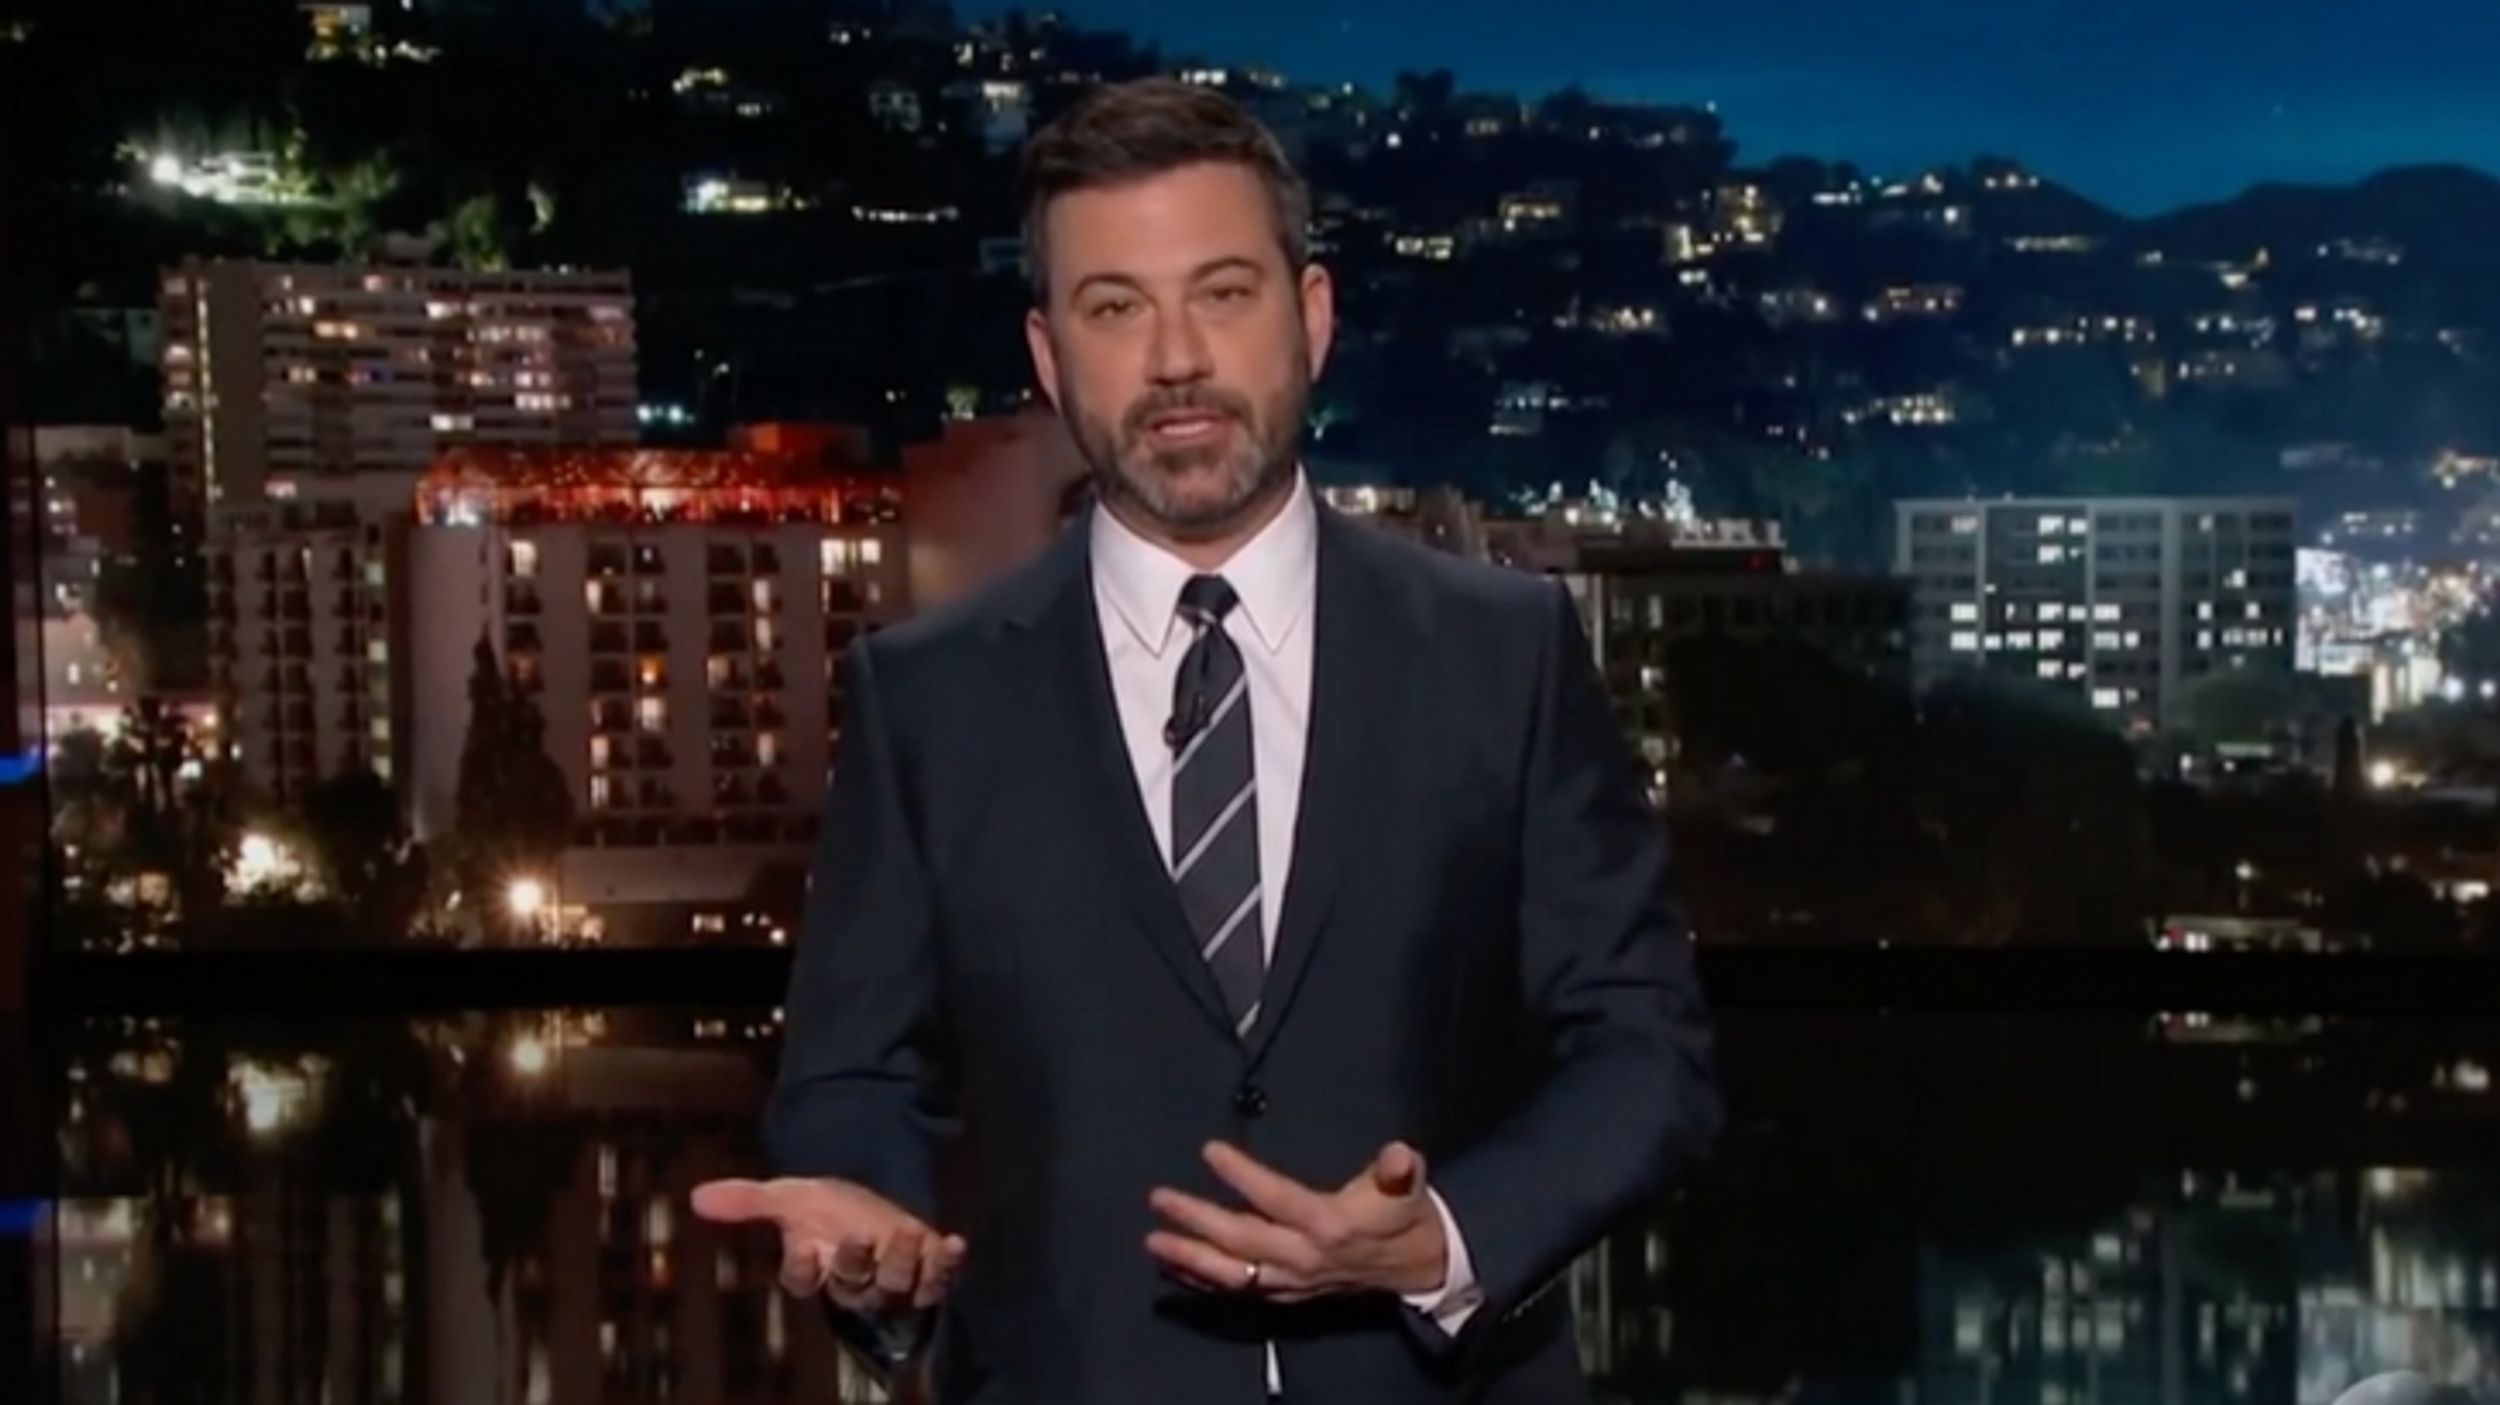 WATCH: Jimmy Kimmel Finds People Wanting to Impeach Hillary Clinton